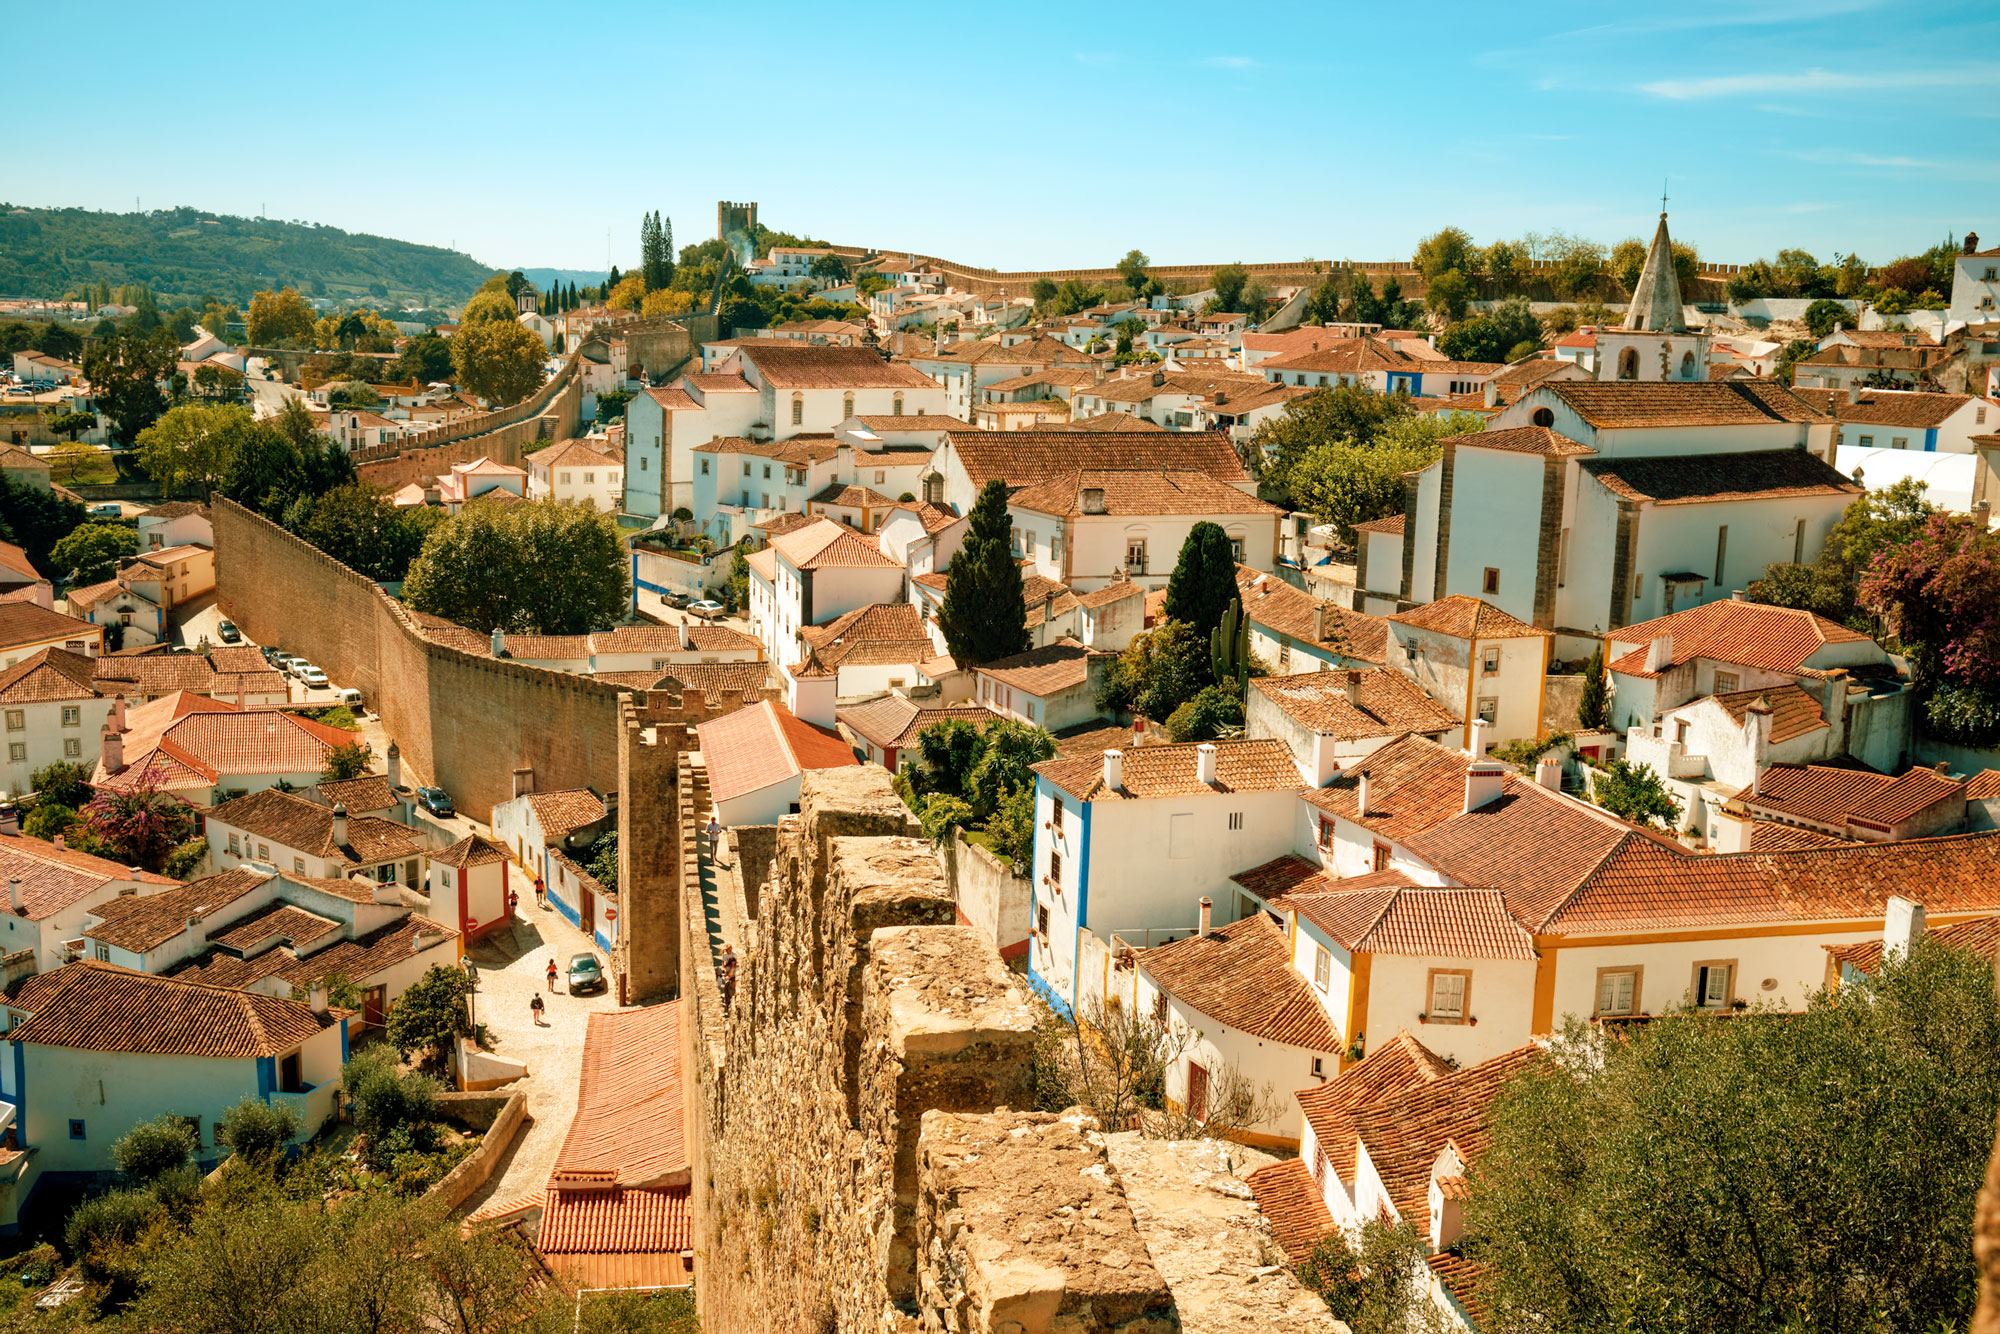 THE-BEAUTIFUL-AND-ANCIENT-CITY-OF-OBIDOS-FROM-THE-OUTER-CASTLE-WALLS-